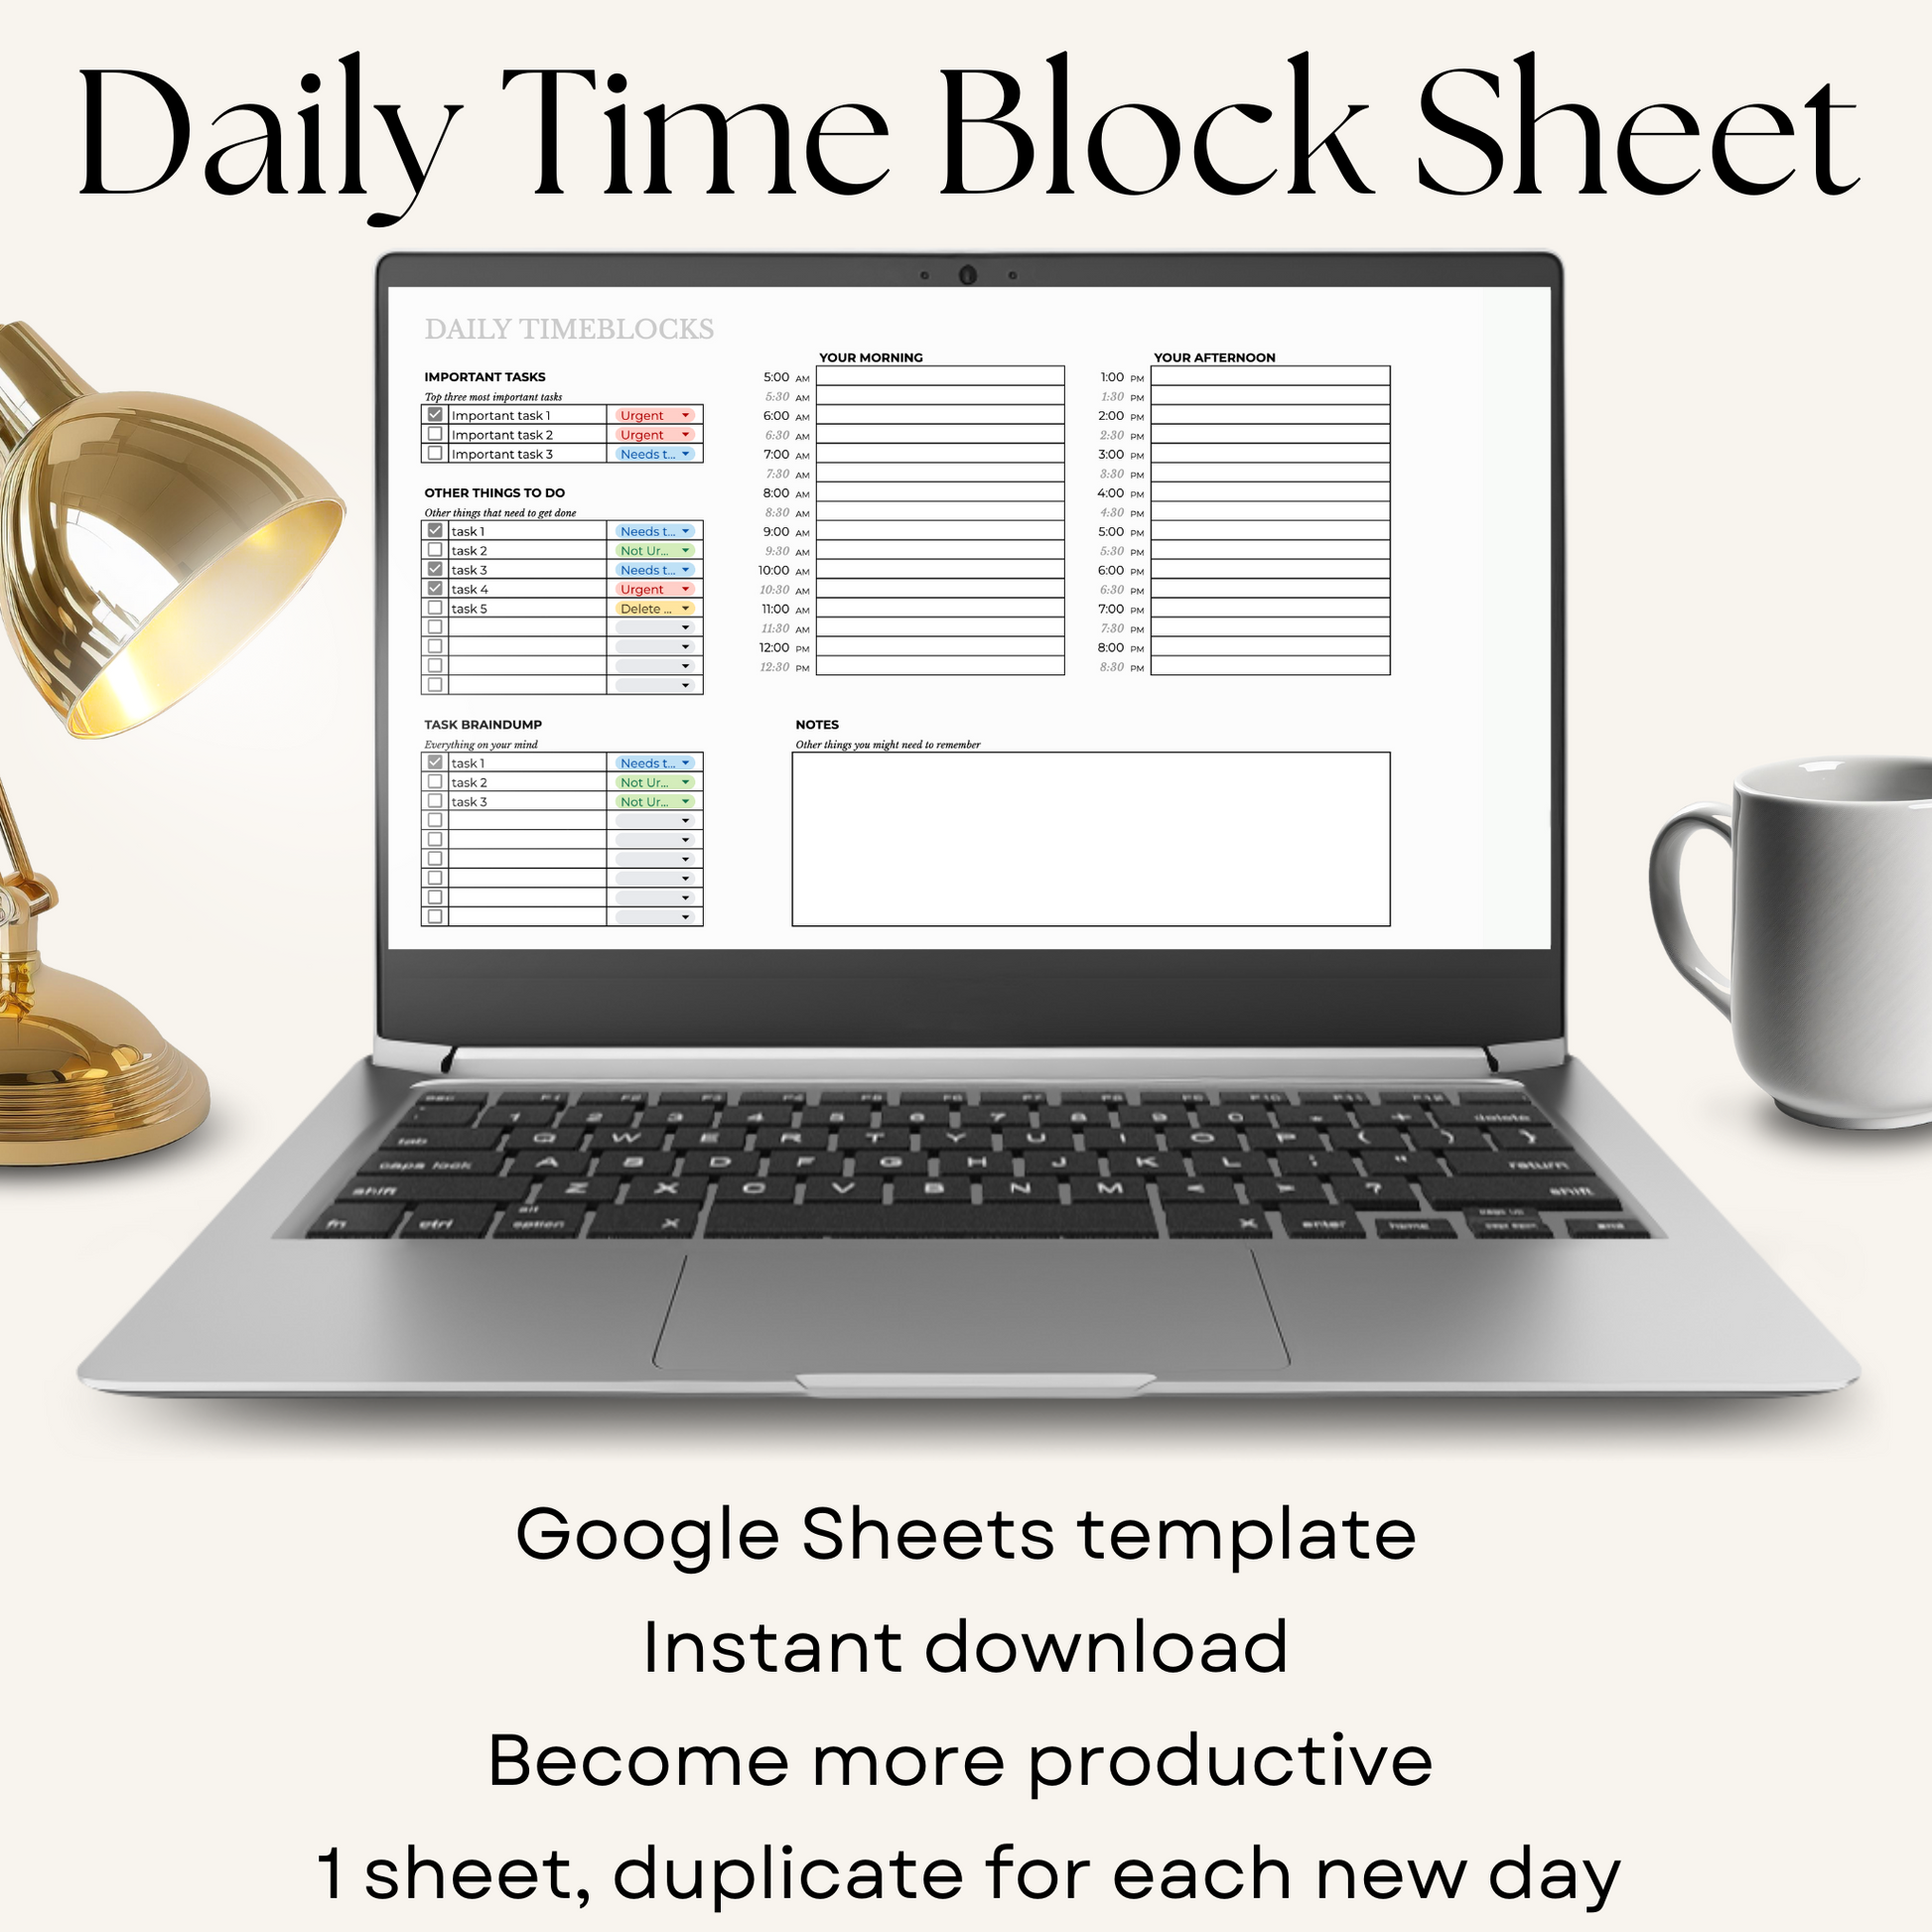 Daily time block sheet productivity tool for google sheets. daily planner